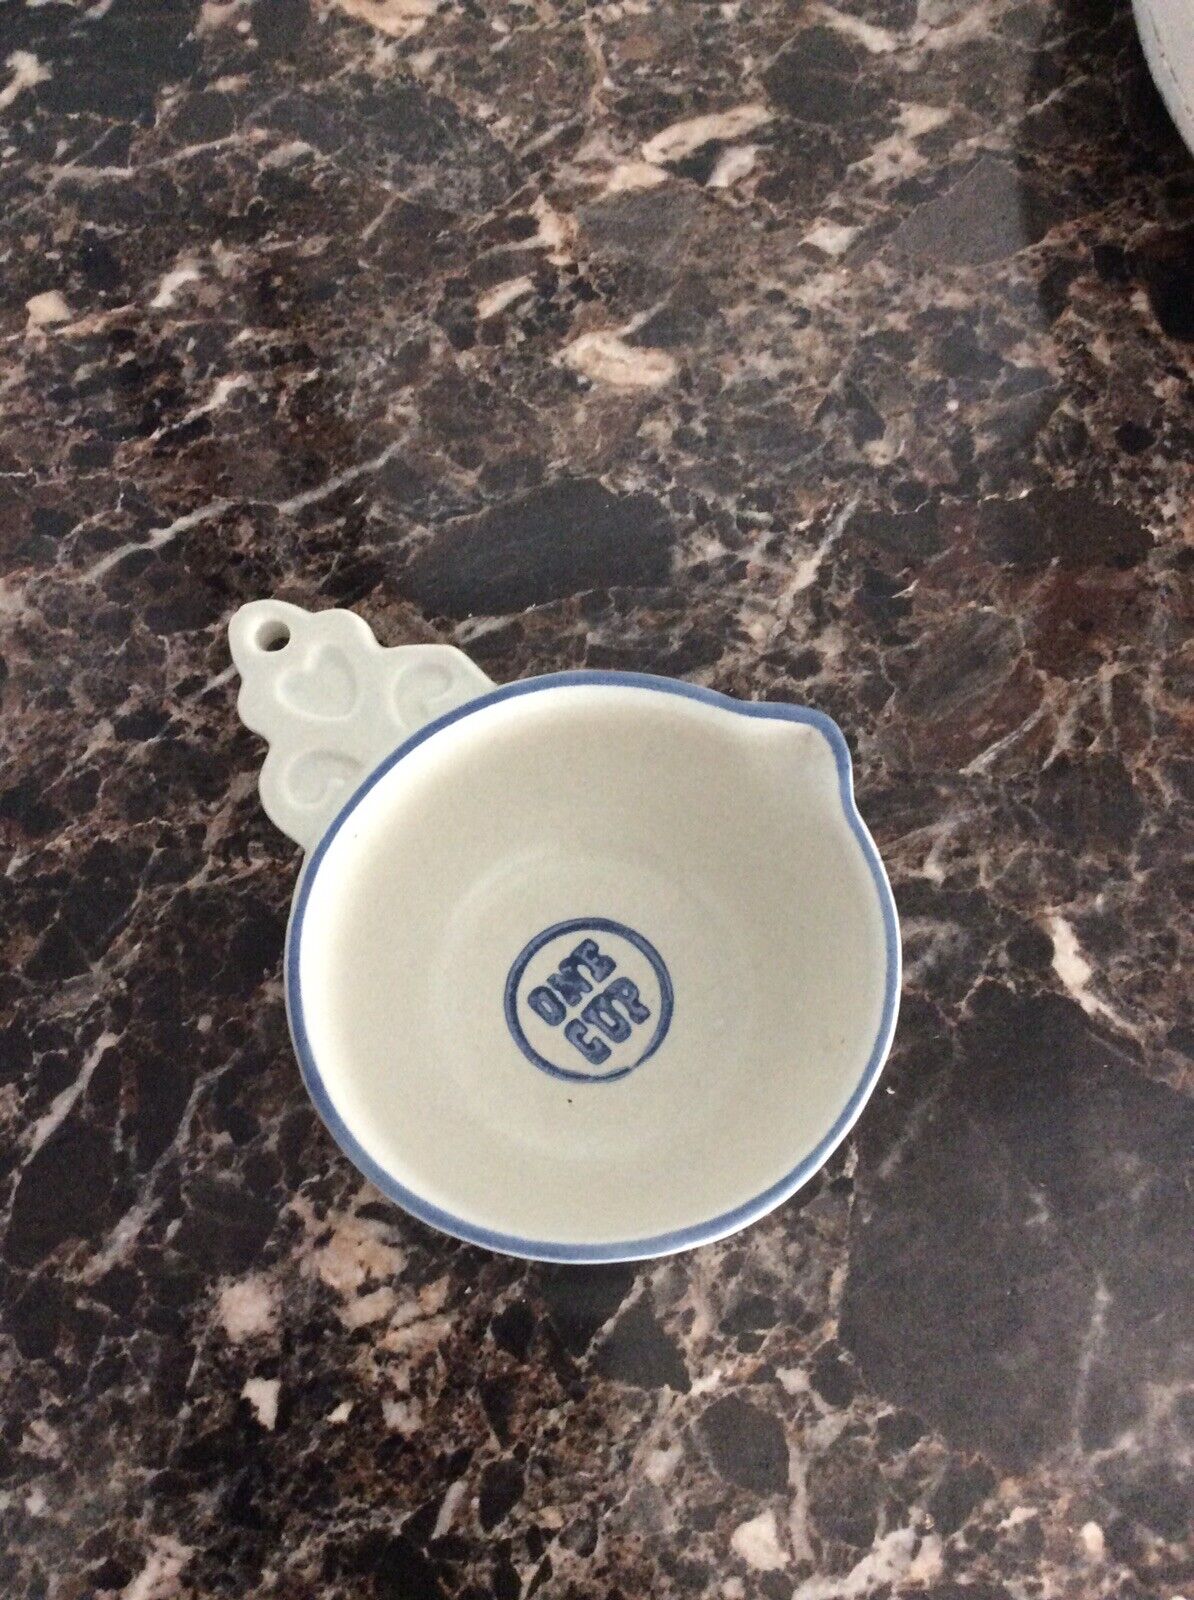 Vintage Pfaltzgraff Yorktowne 1 Cup Ceramic Measuring Cup Replacement USA Made